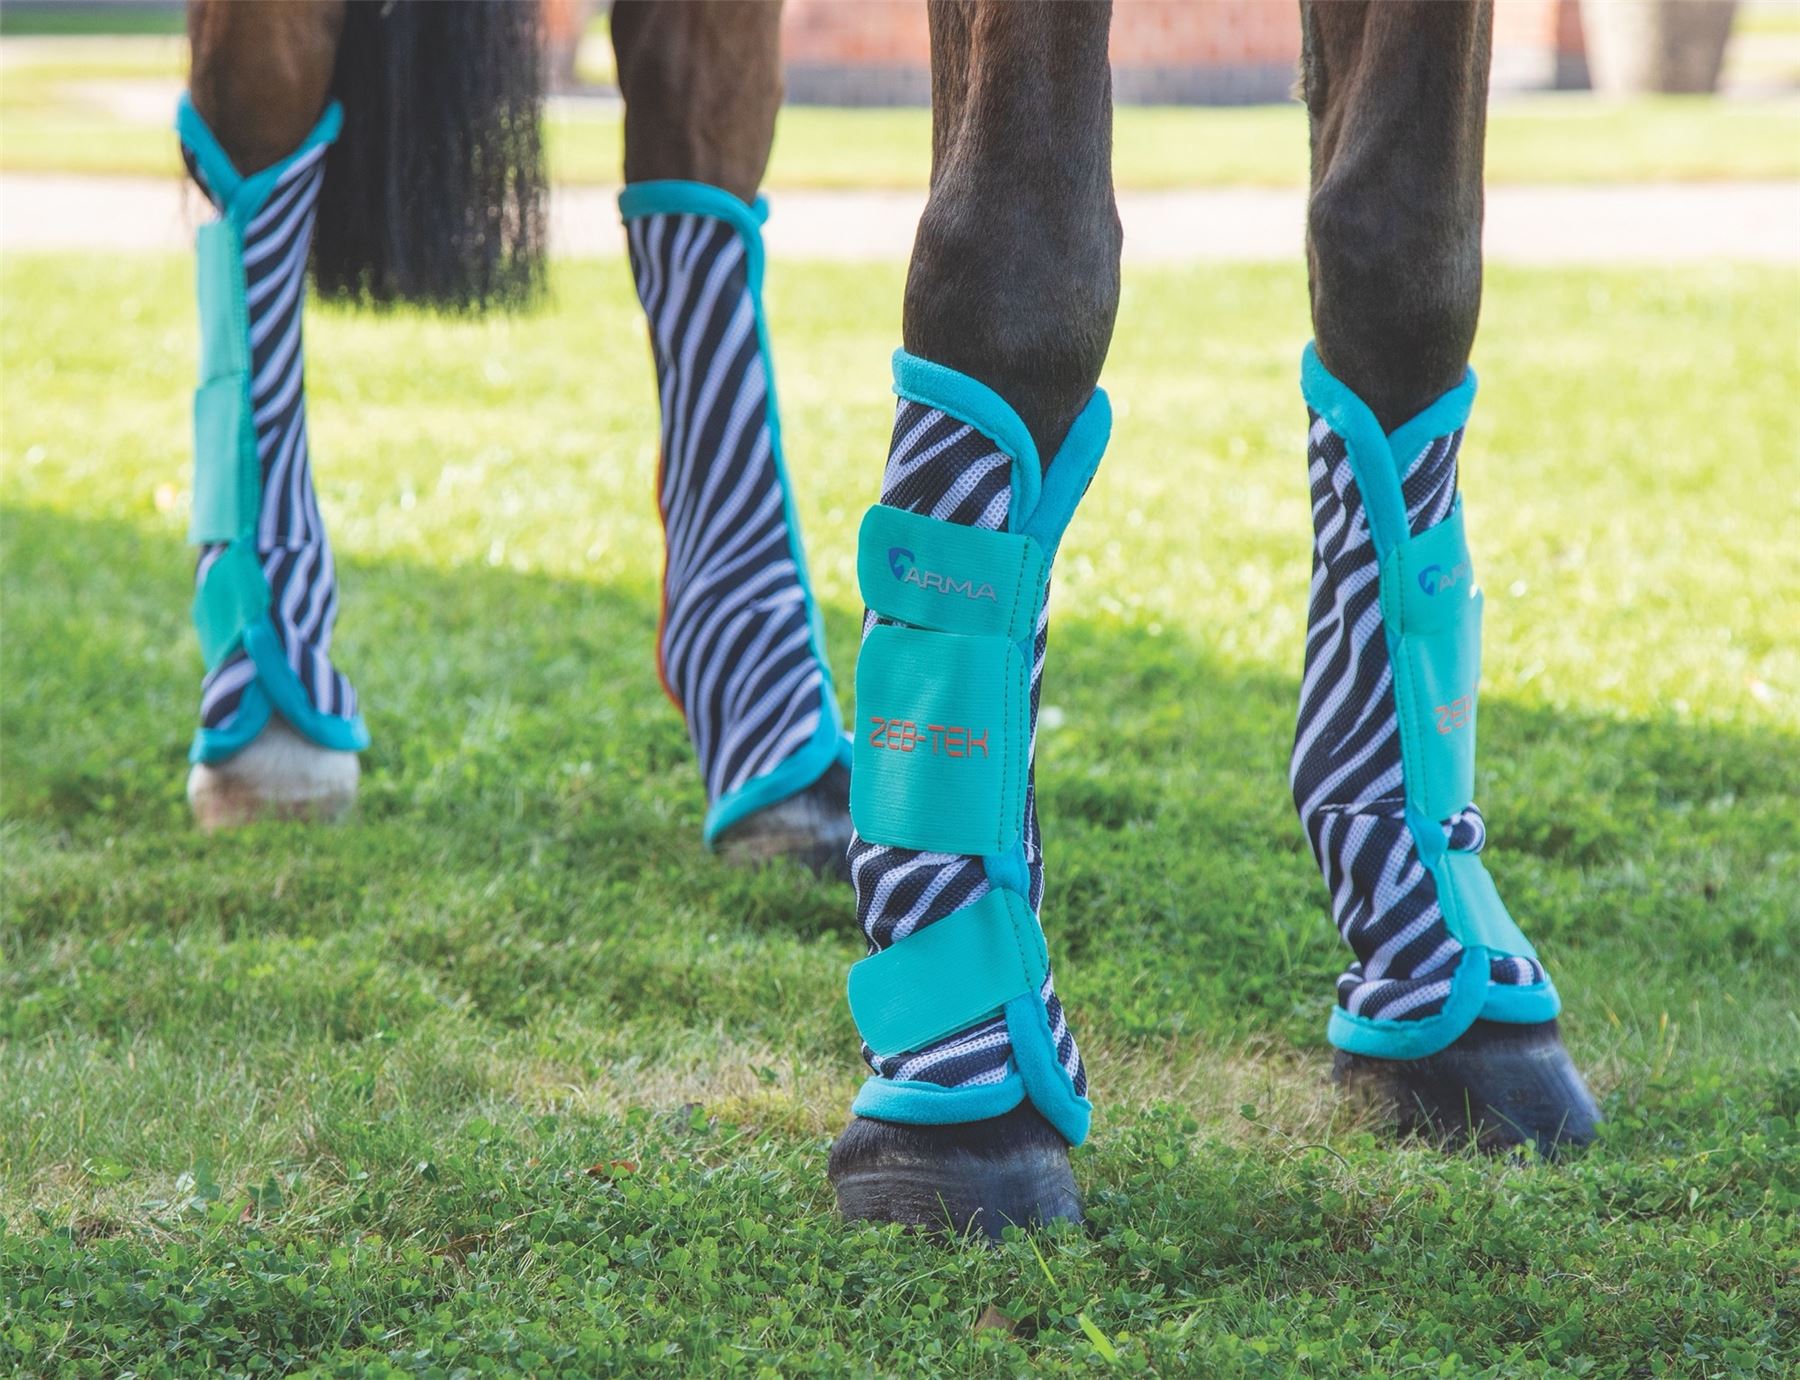 Shires Arma Zeb-Tek Fly Turnout Socks - Just Horse Riders